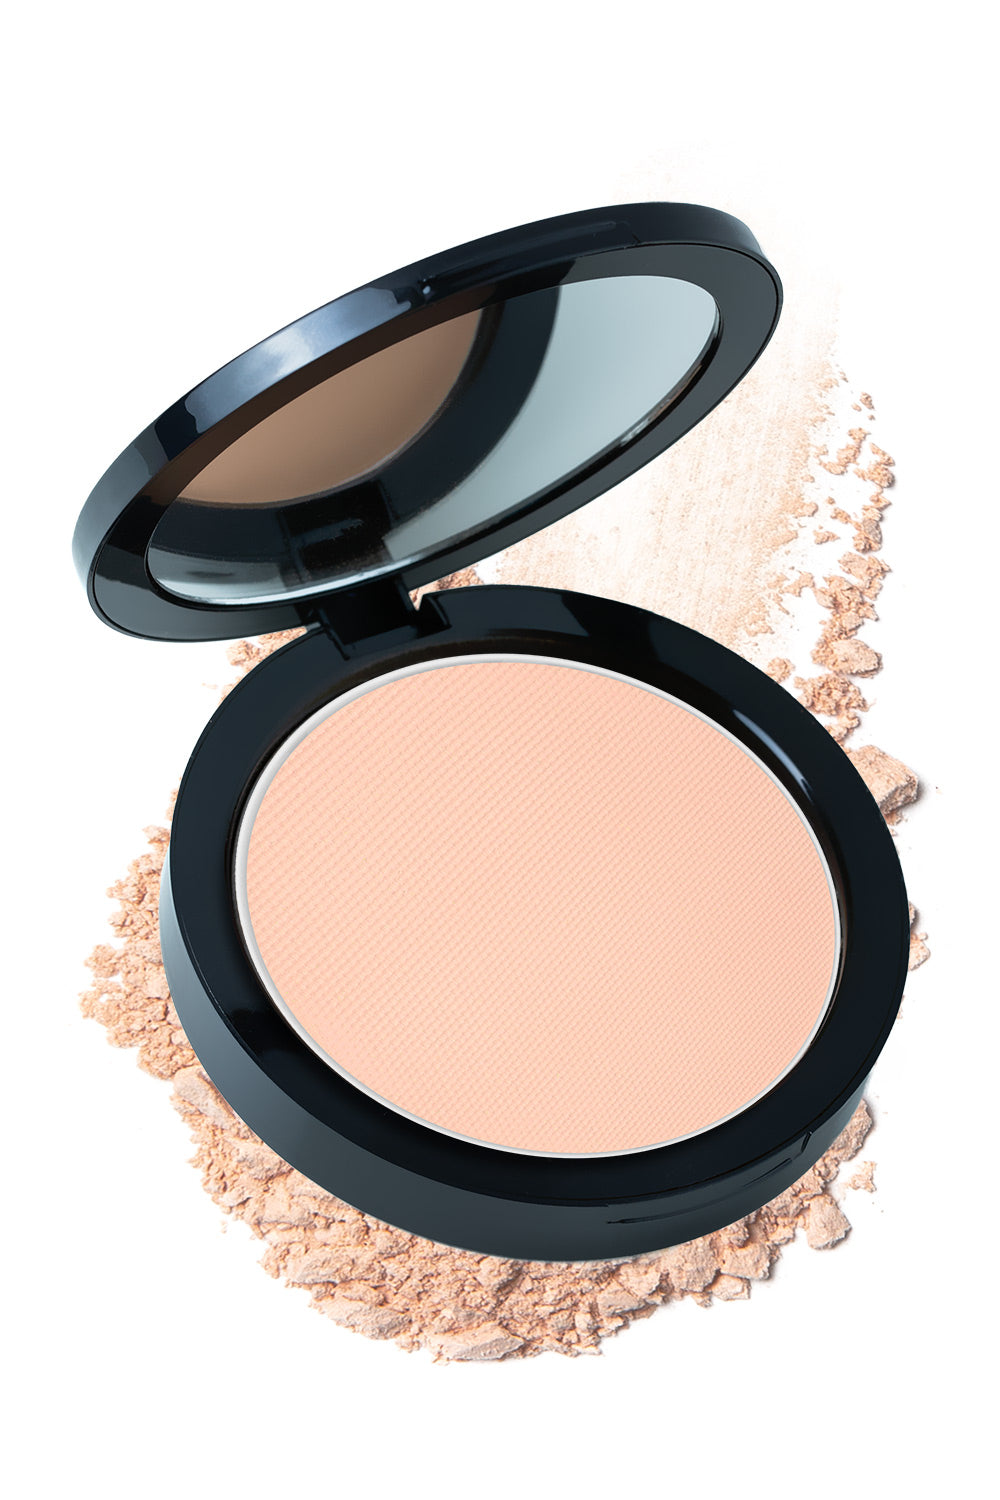 Trying out 👀 the new Makeup Forever HD Powder Foundation #makeupfore, powder foundation